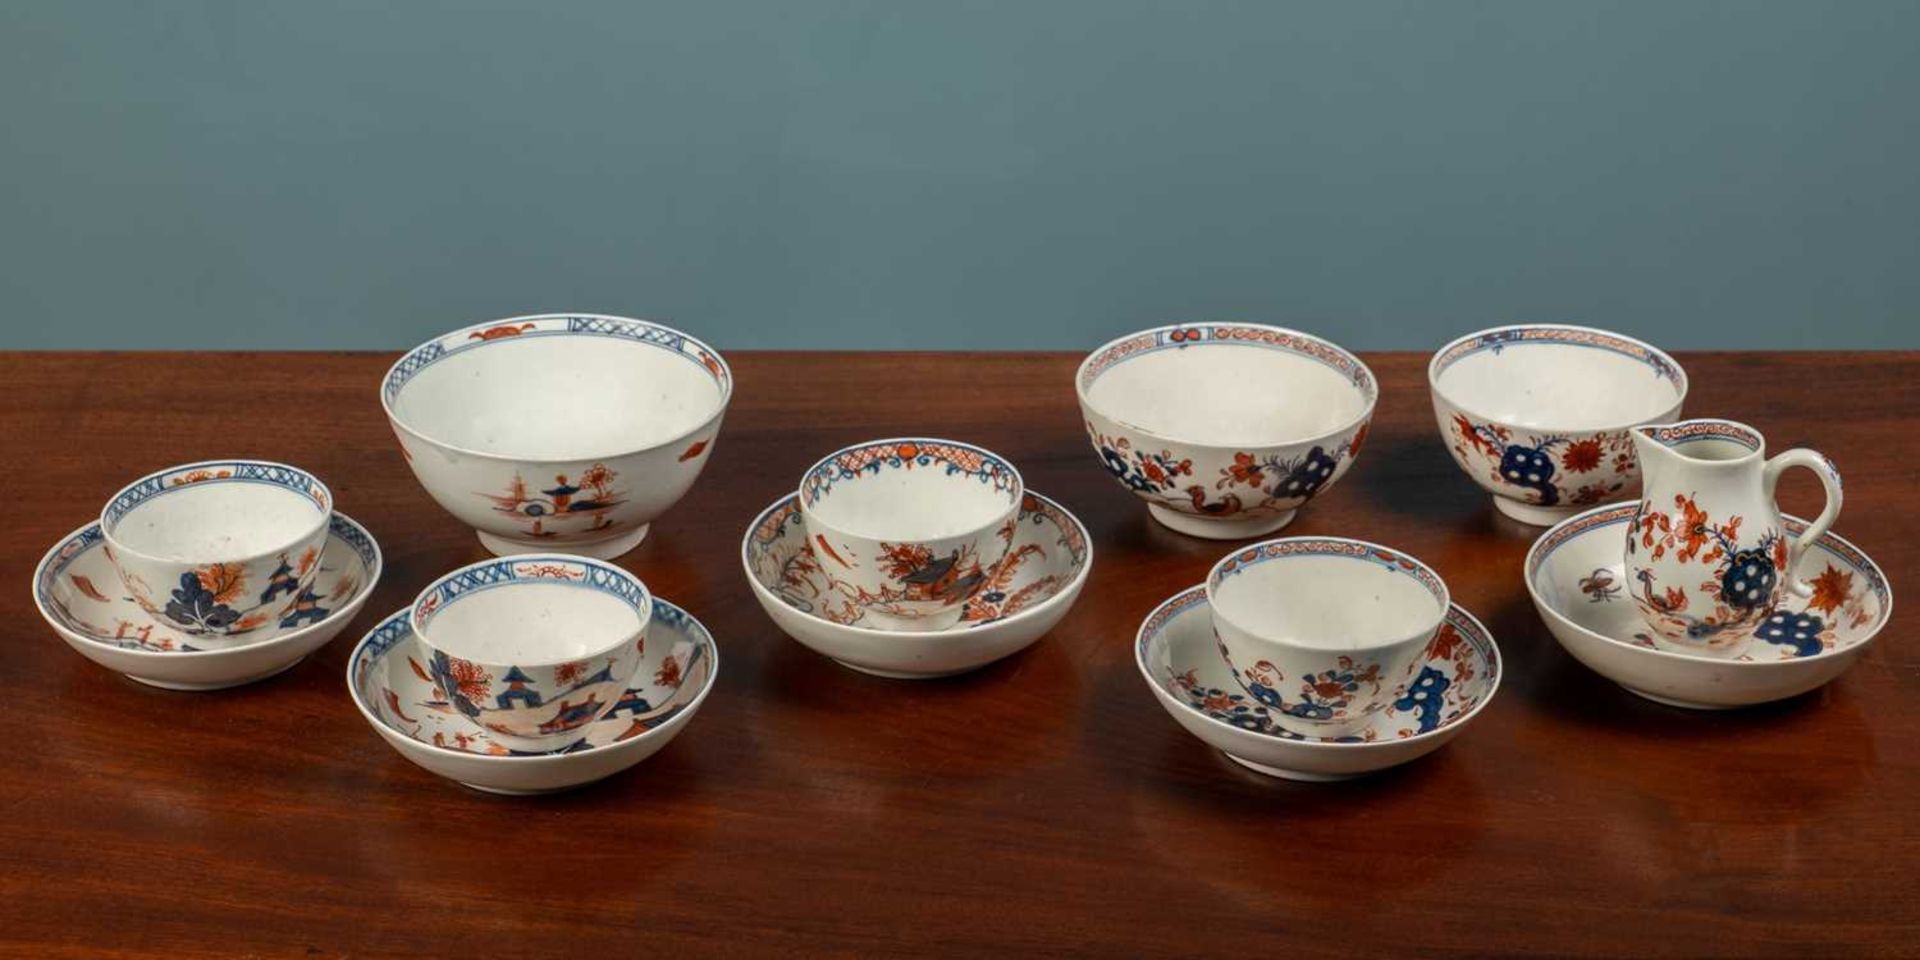 A group of 18th century porcelain wares